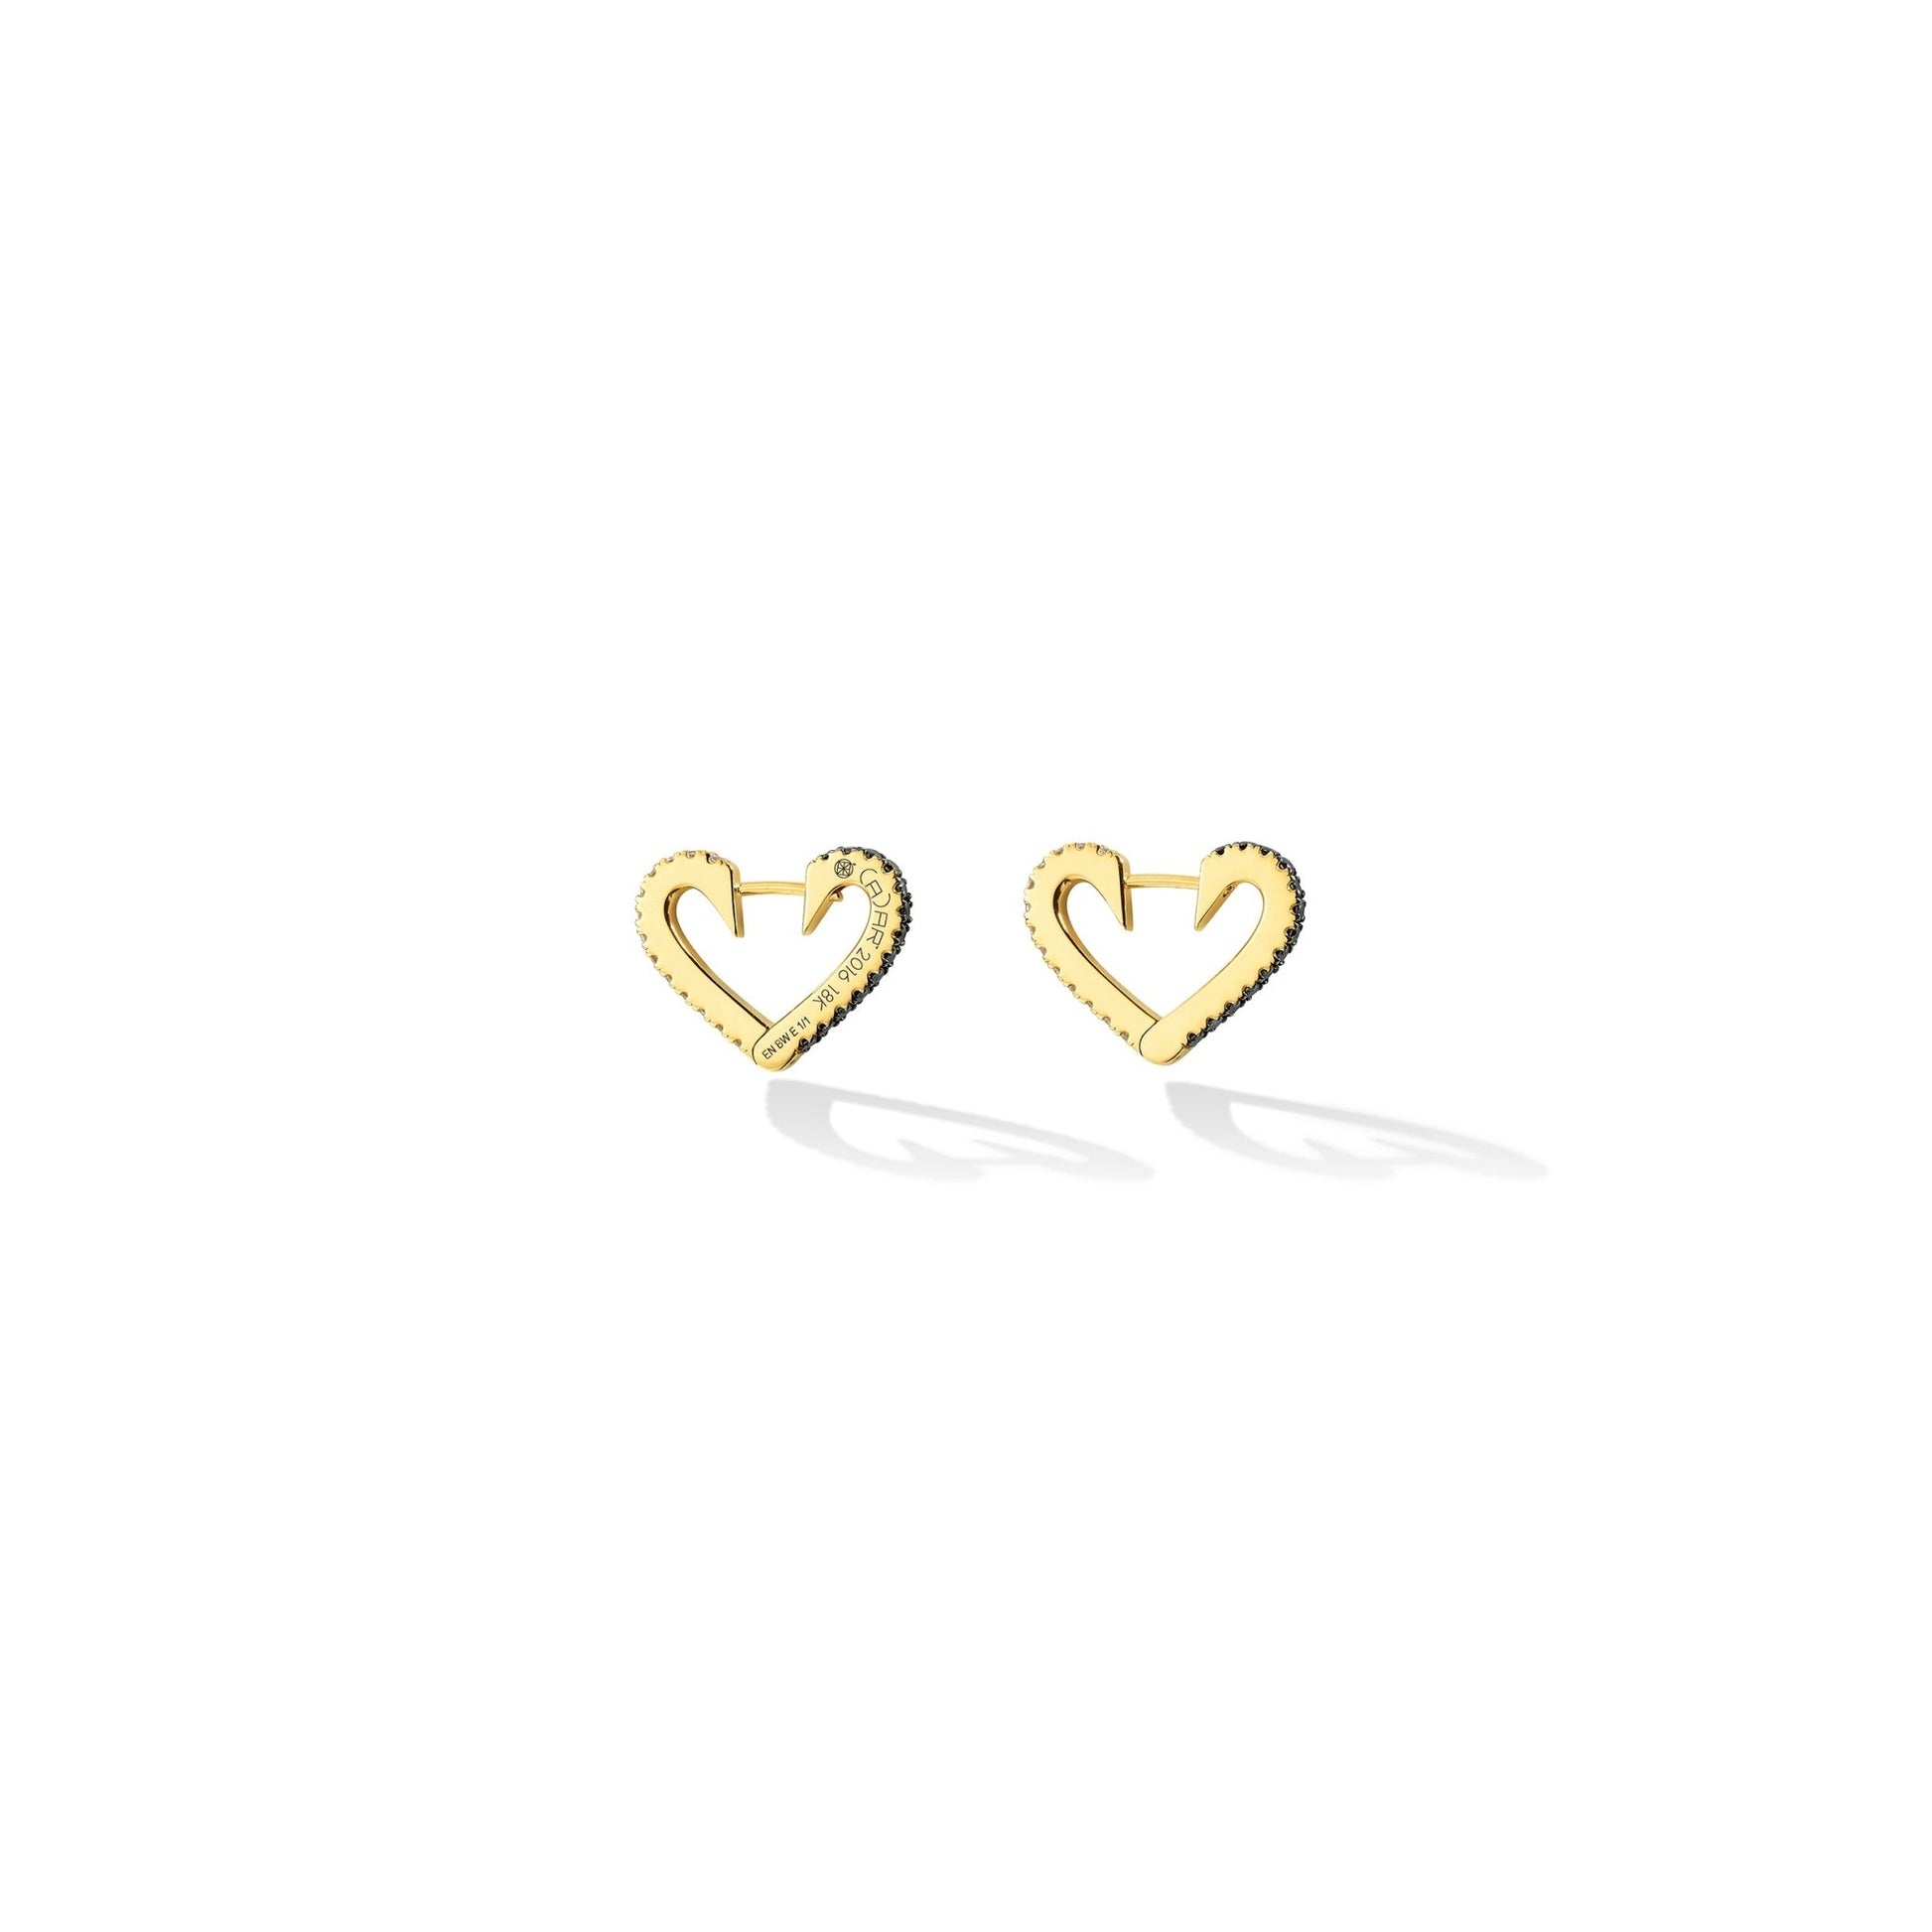 Small Yellow Gold Endless Hoop Earrings with Black and White Diamonds - Cadar